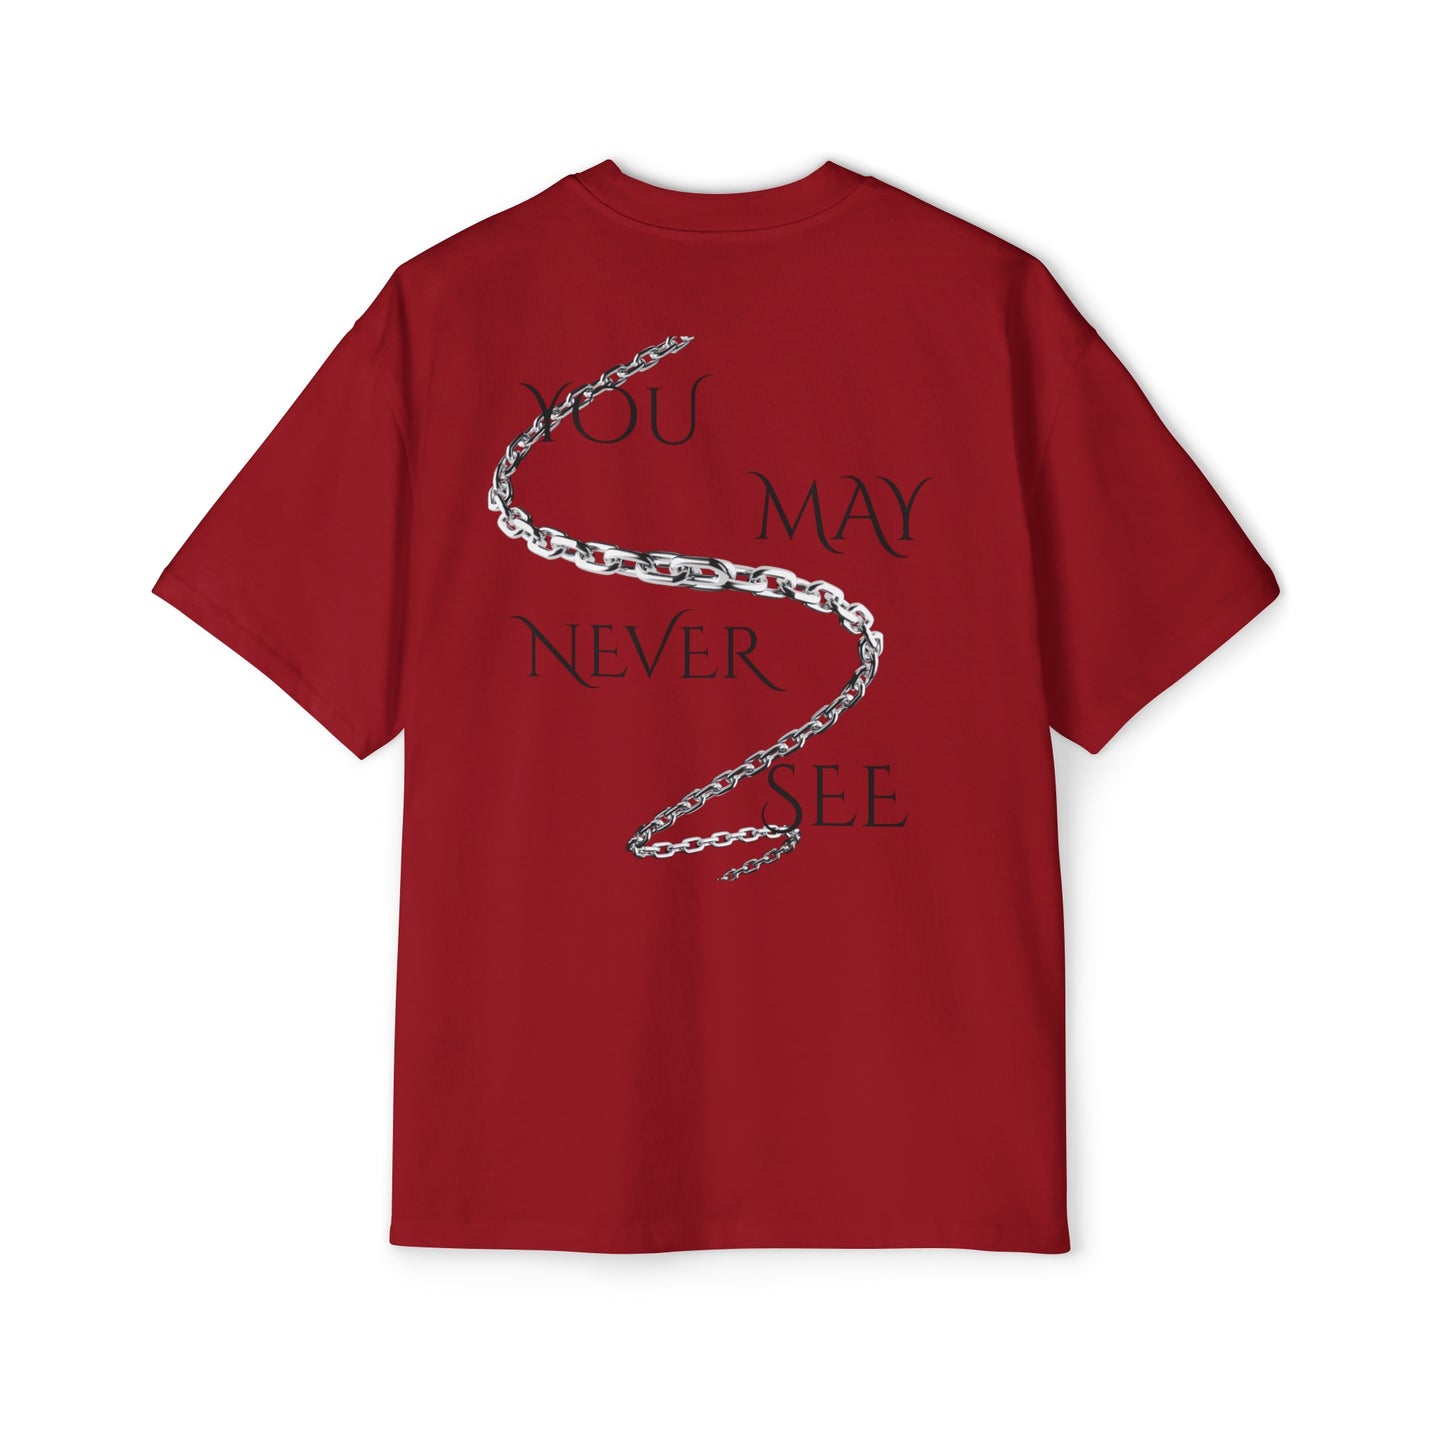 You May Never See "Shackled" - OVERSIZED TEE